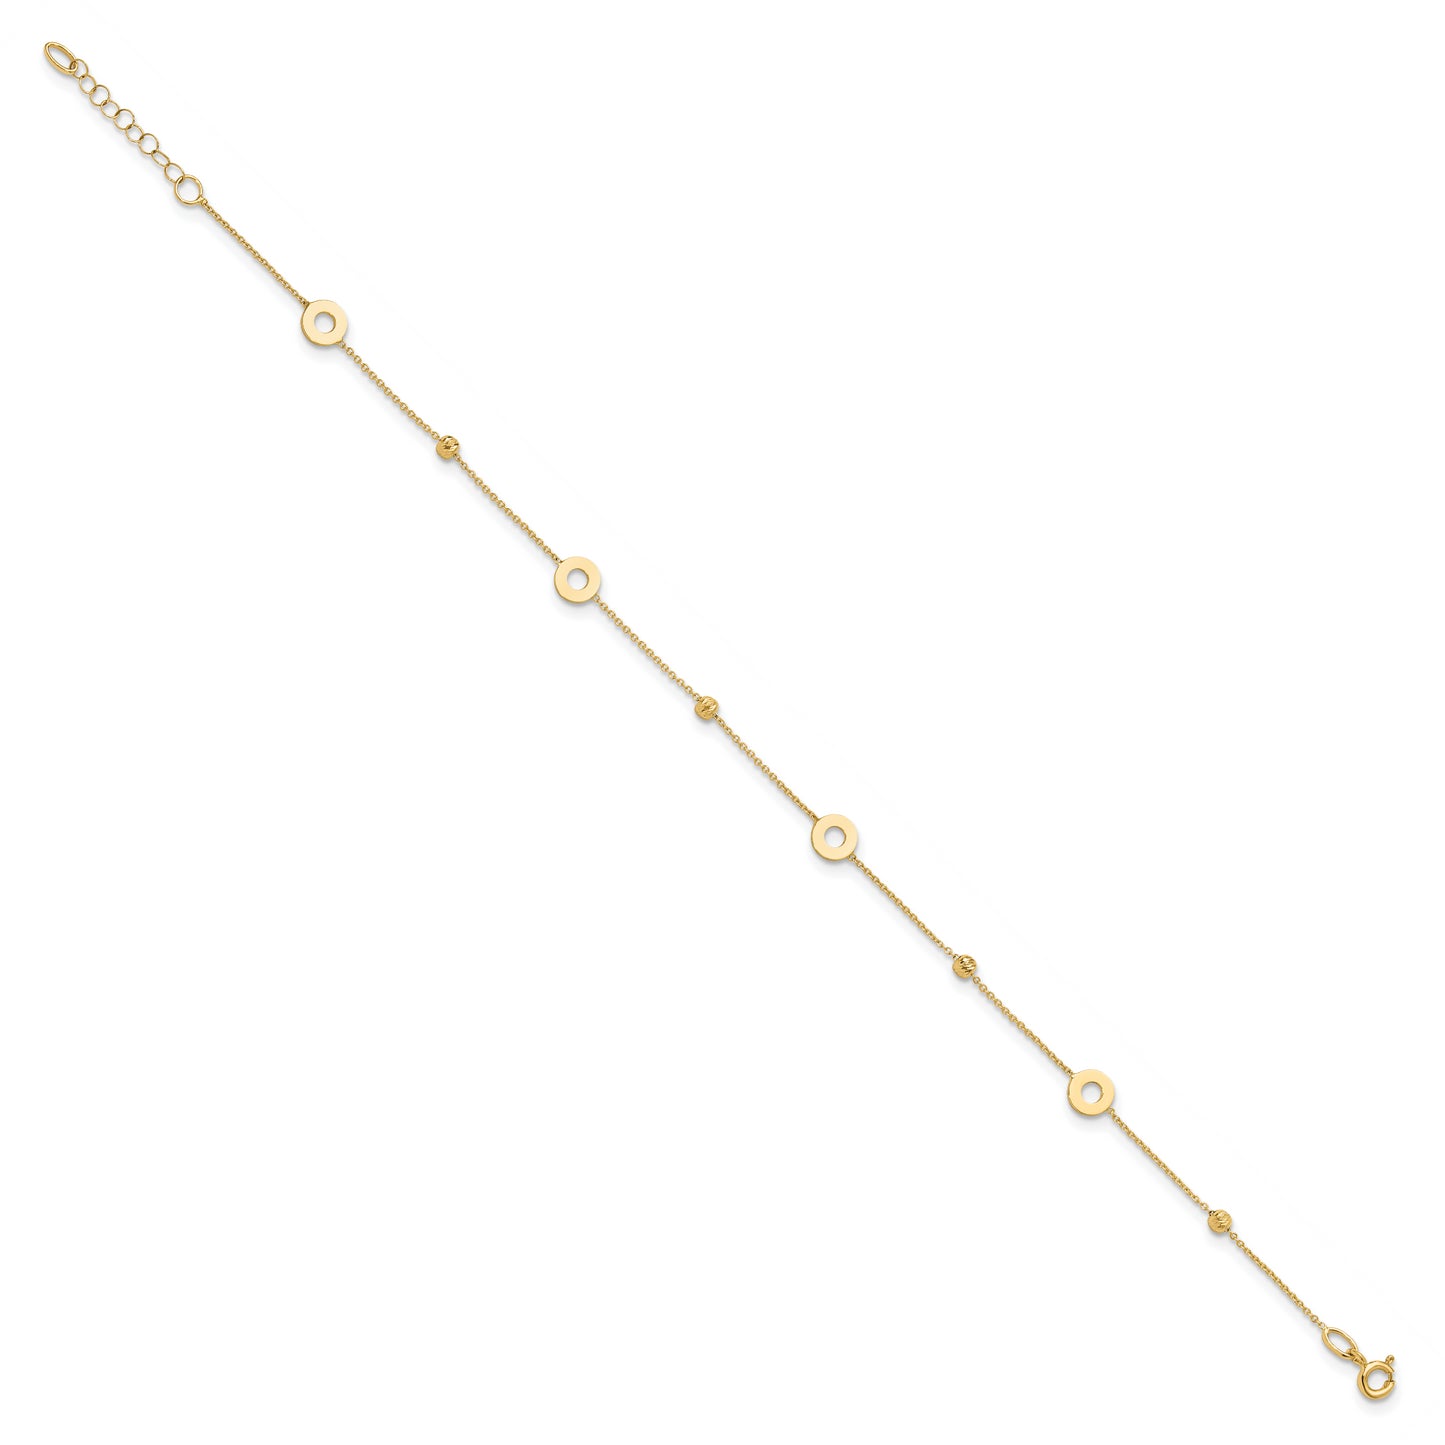 Leslie's 14K Polished and D/C Beads 9in Plus 1in ext. Anklet